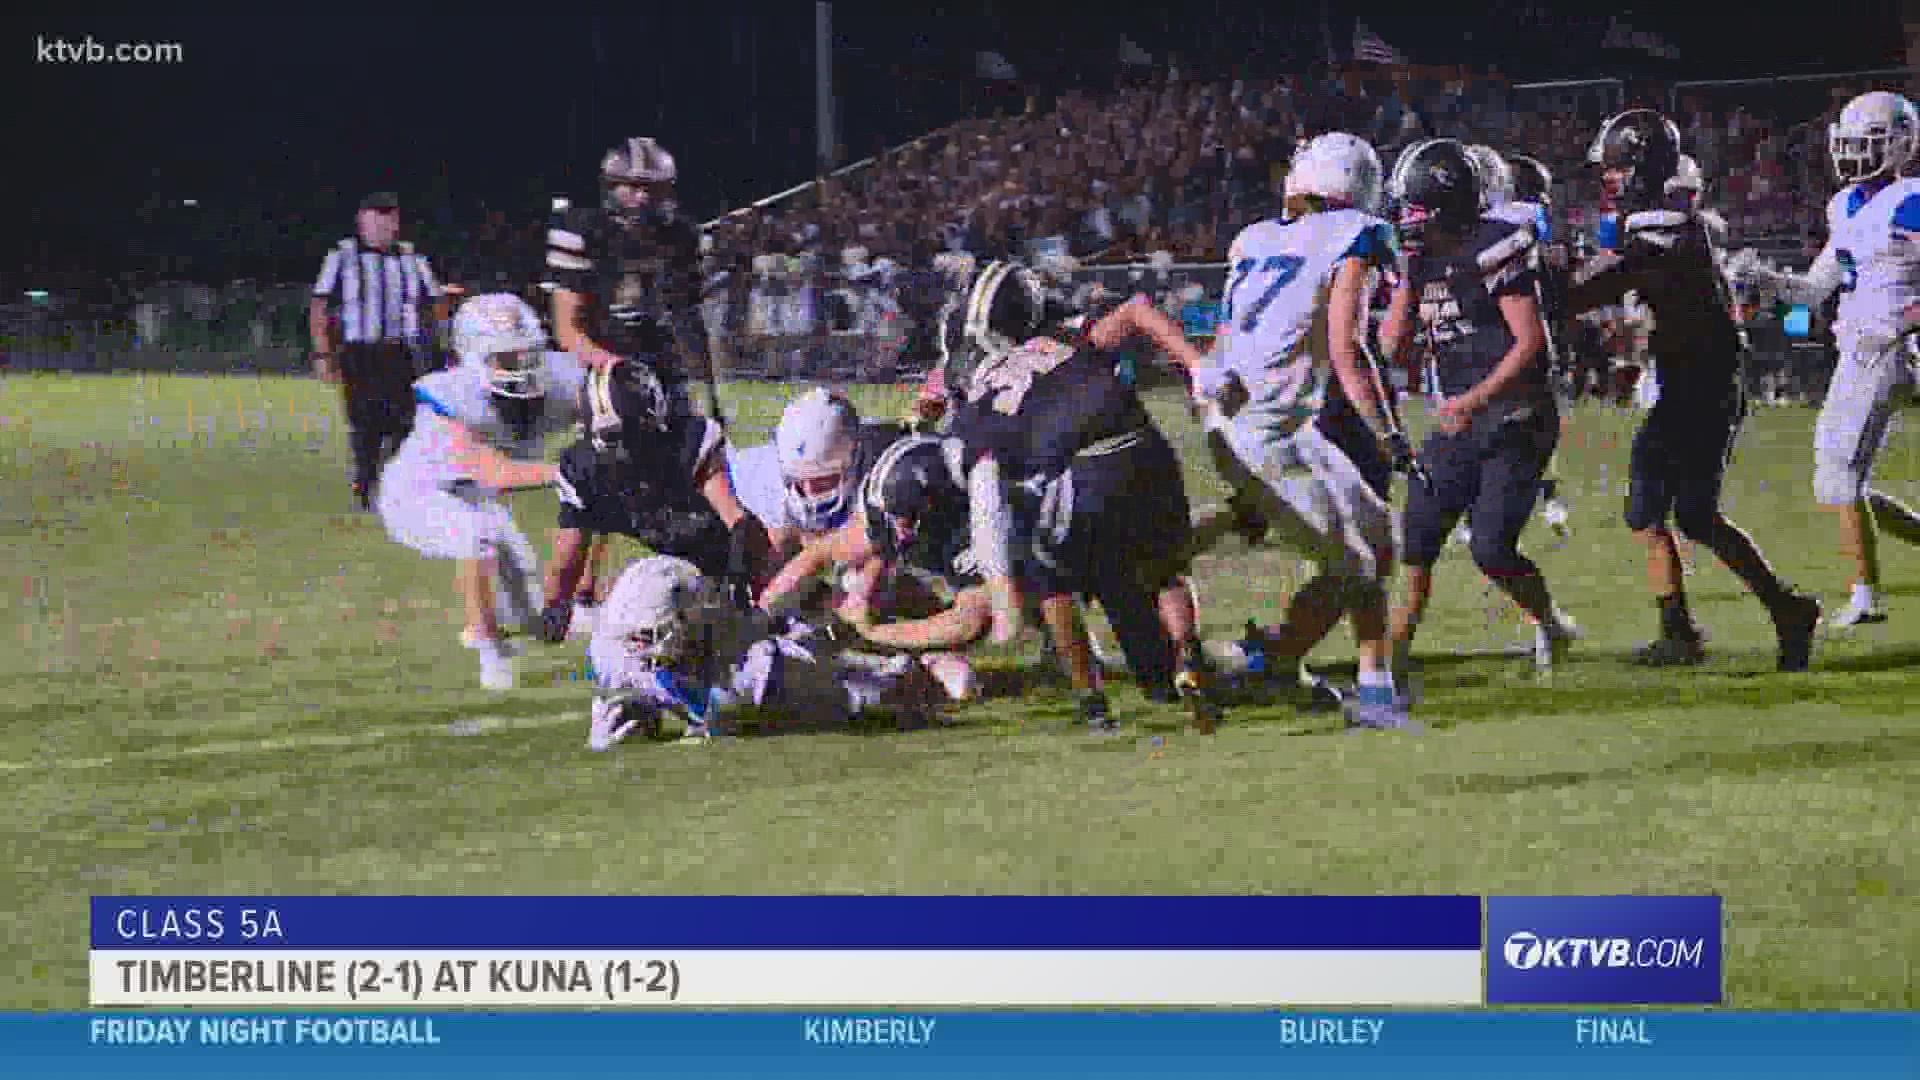 The Timberline Wolves improved to 3-1 on the season after beating Kuna.